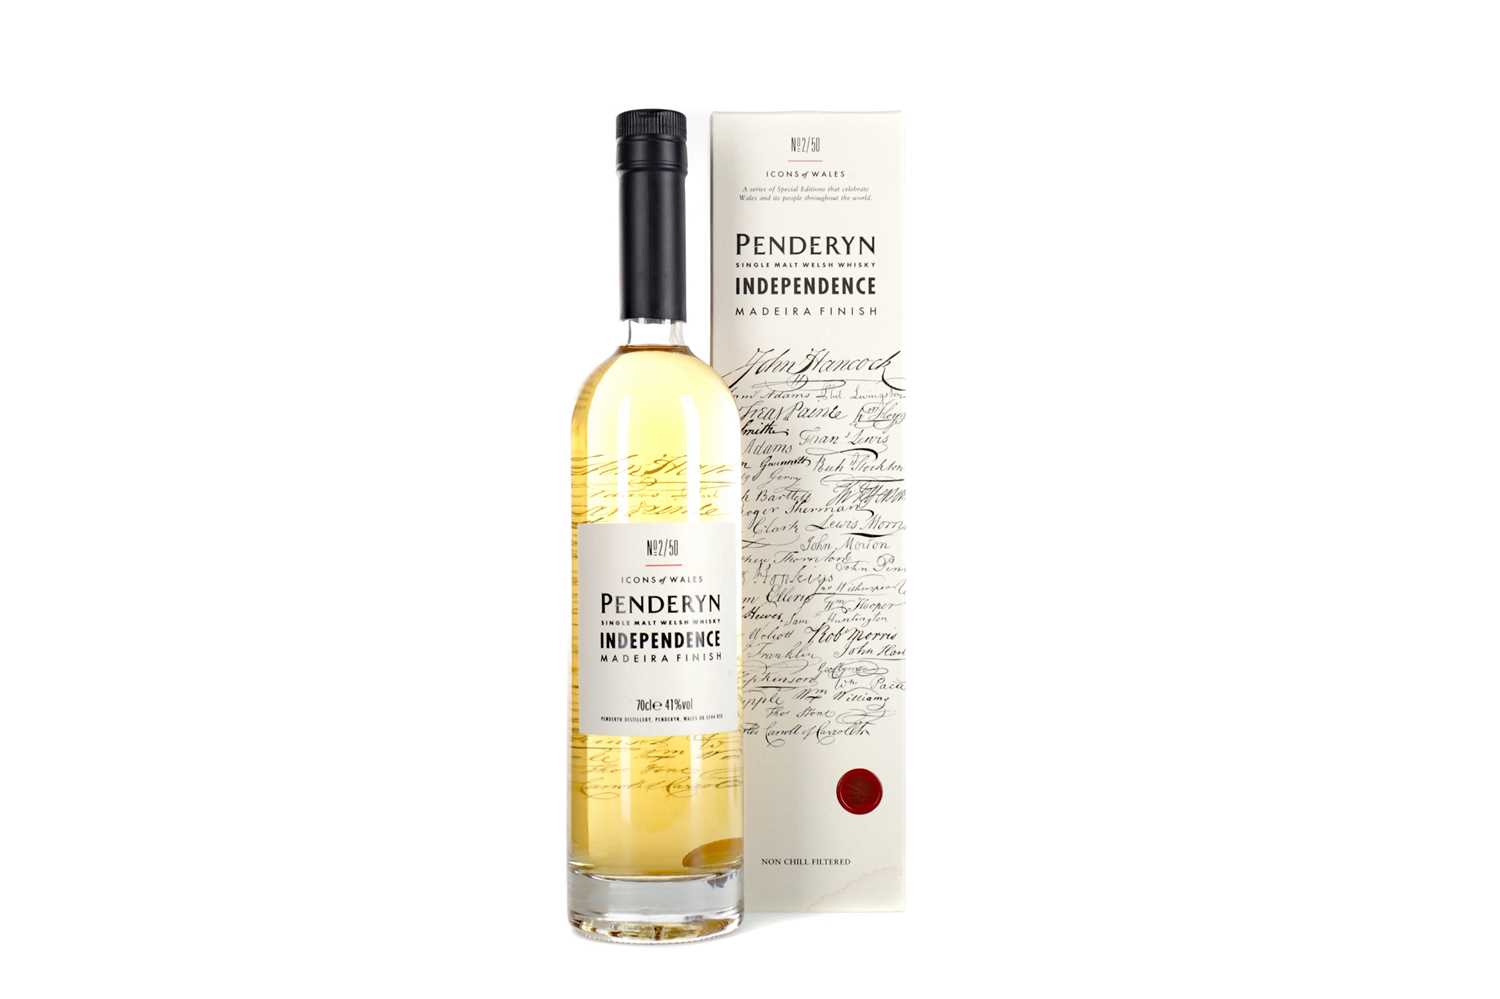 Lot 30 - PENDERYN INDEPENDENCE MADEIRA FINISH